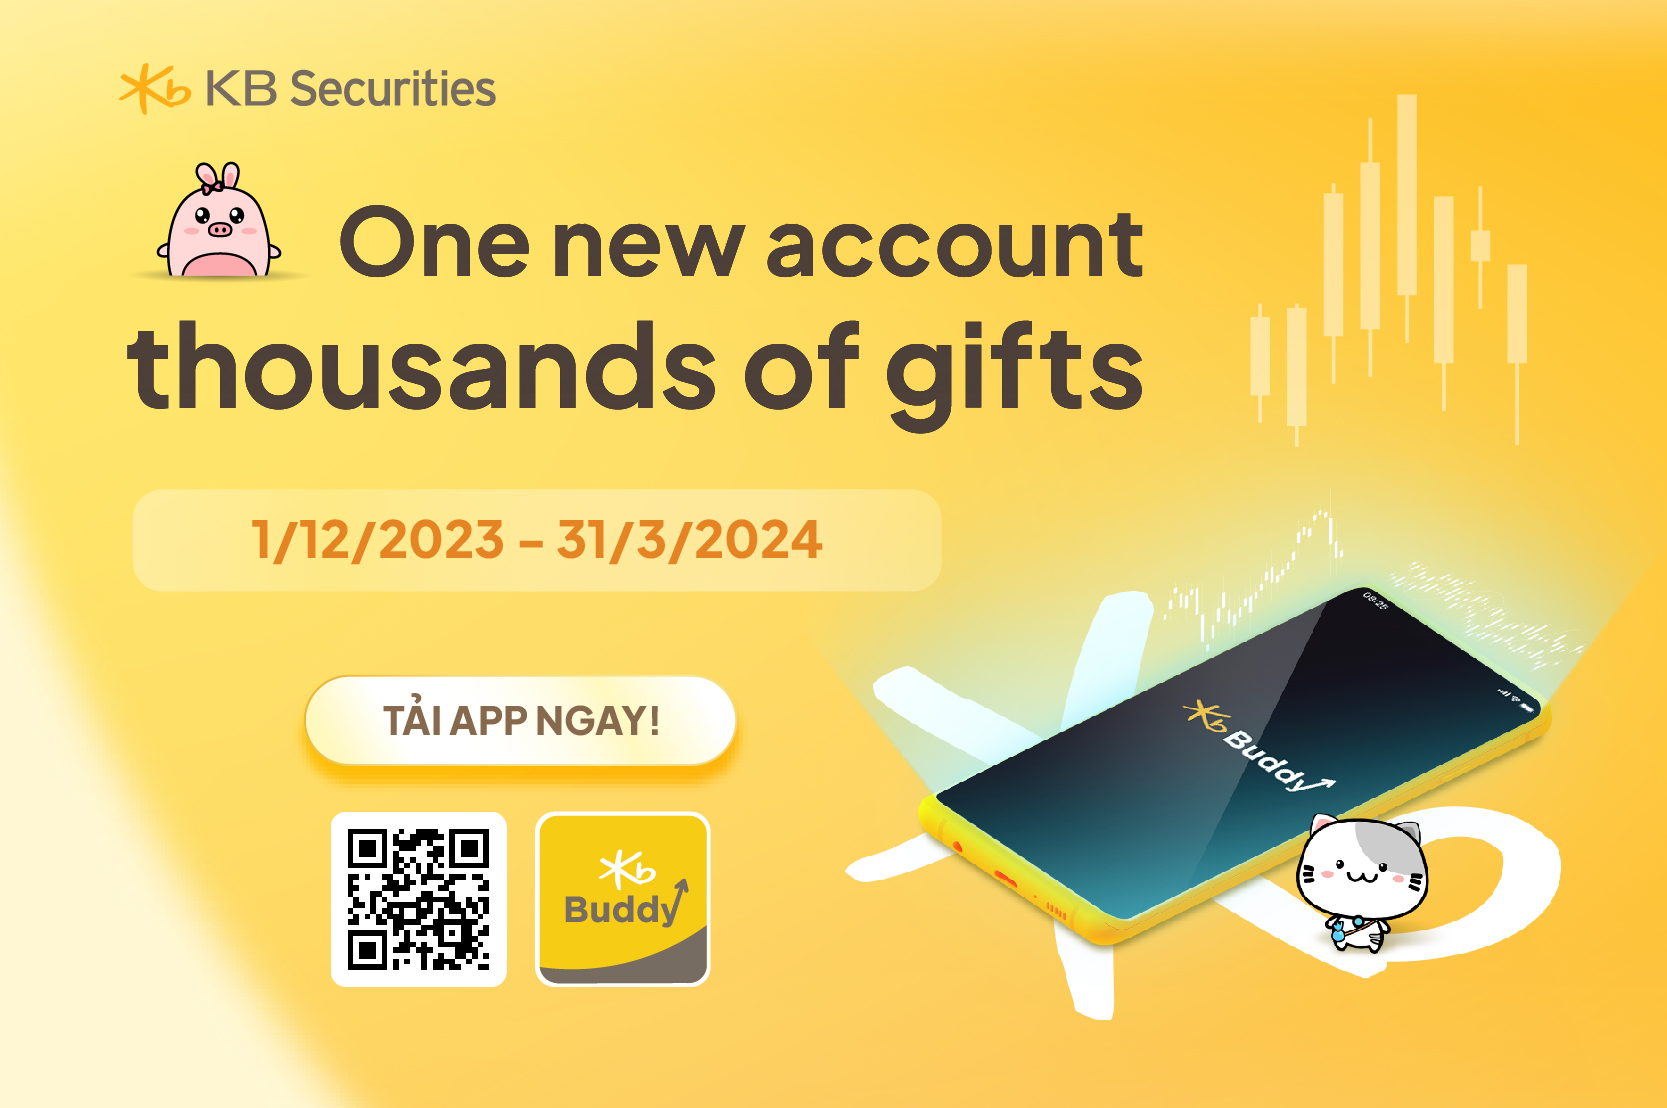 One new account, thousands of gifts. Download KB Buddy Pro now